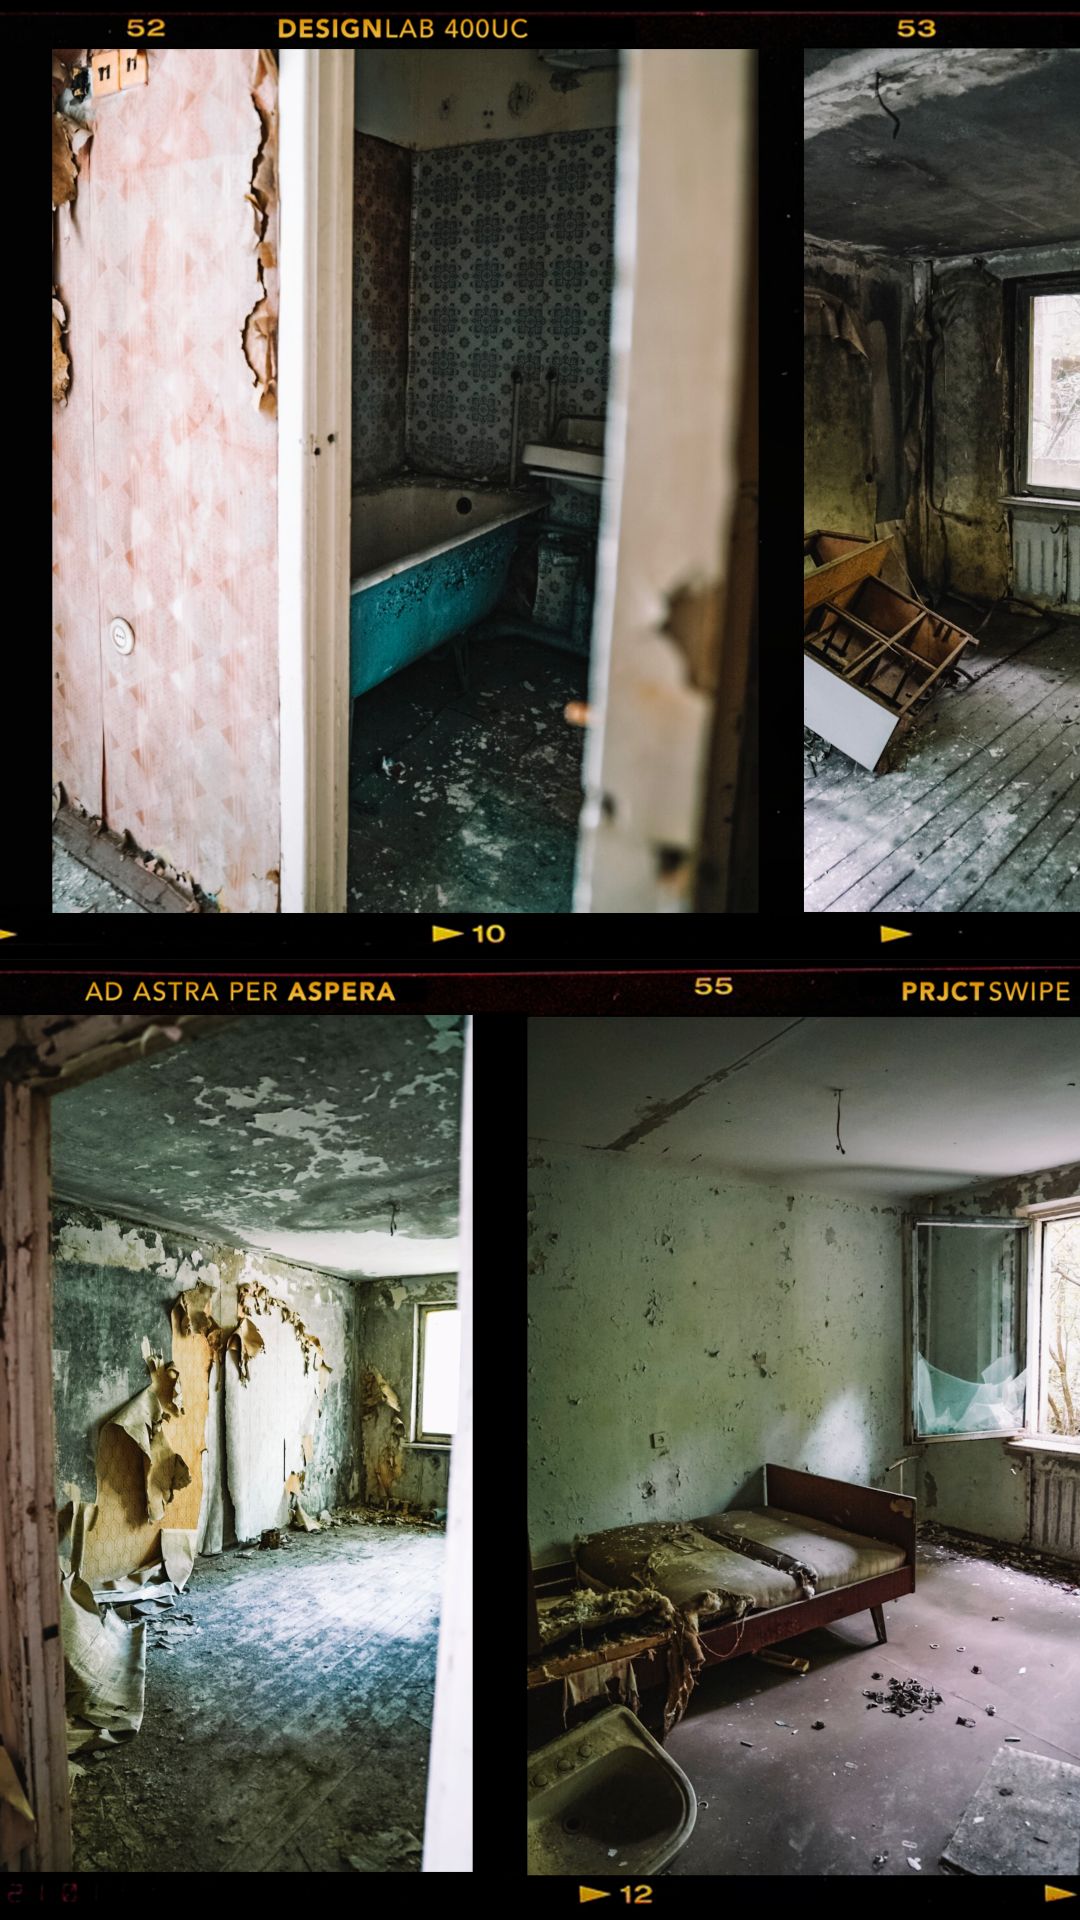 You will see many abandoned areas in the Chernobyl Exclusion Zone